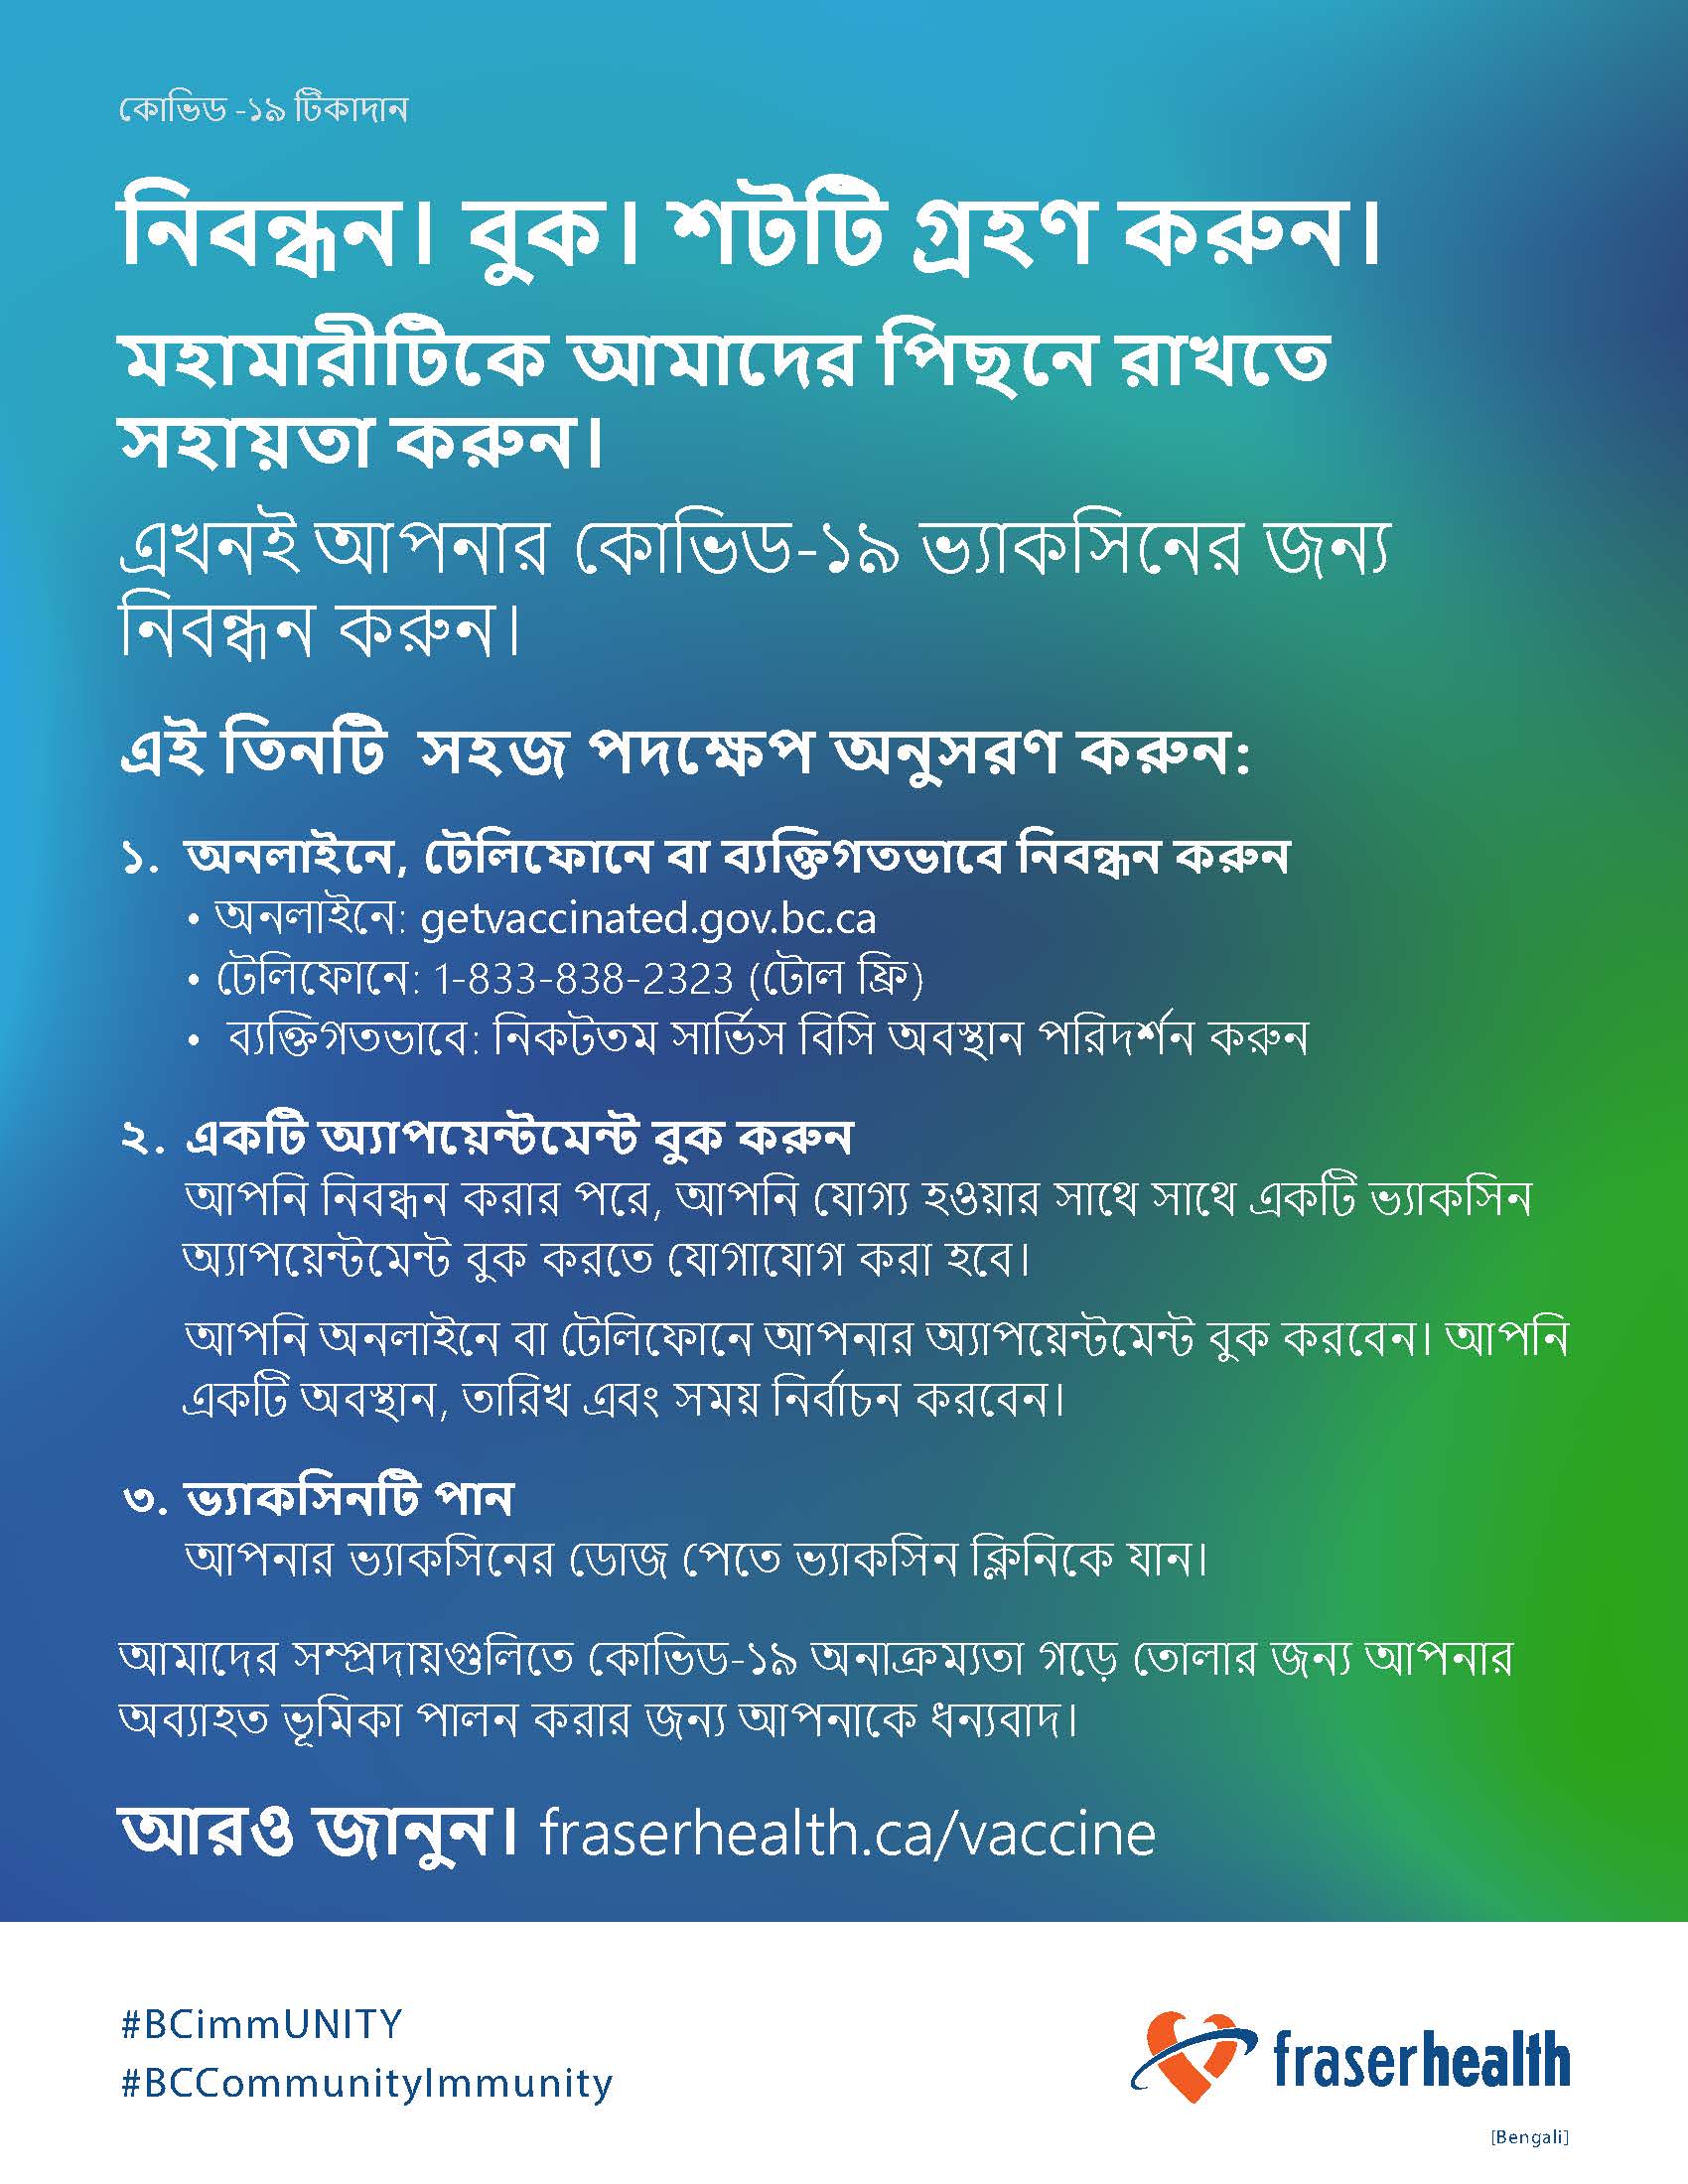 Vaccine registration for Bengali in colour